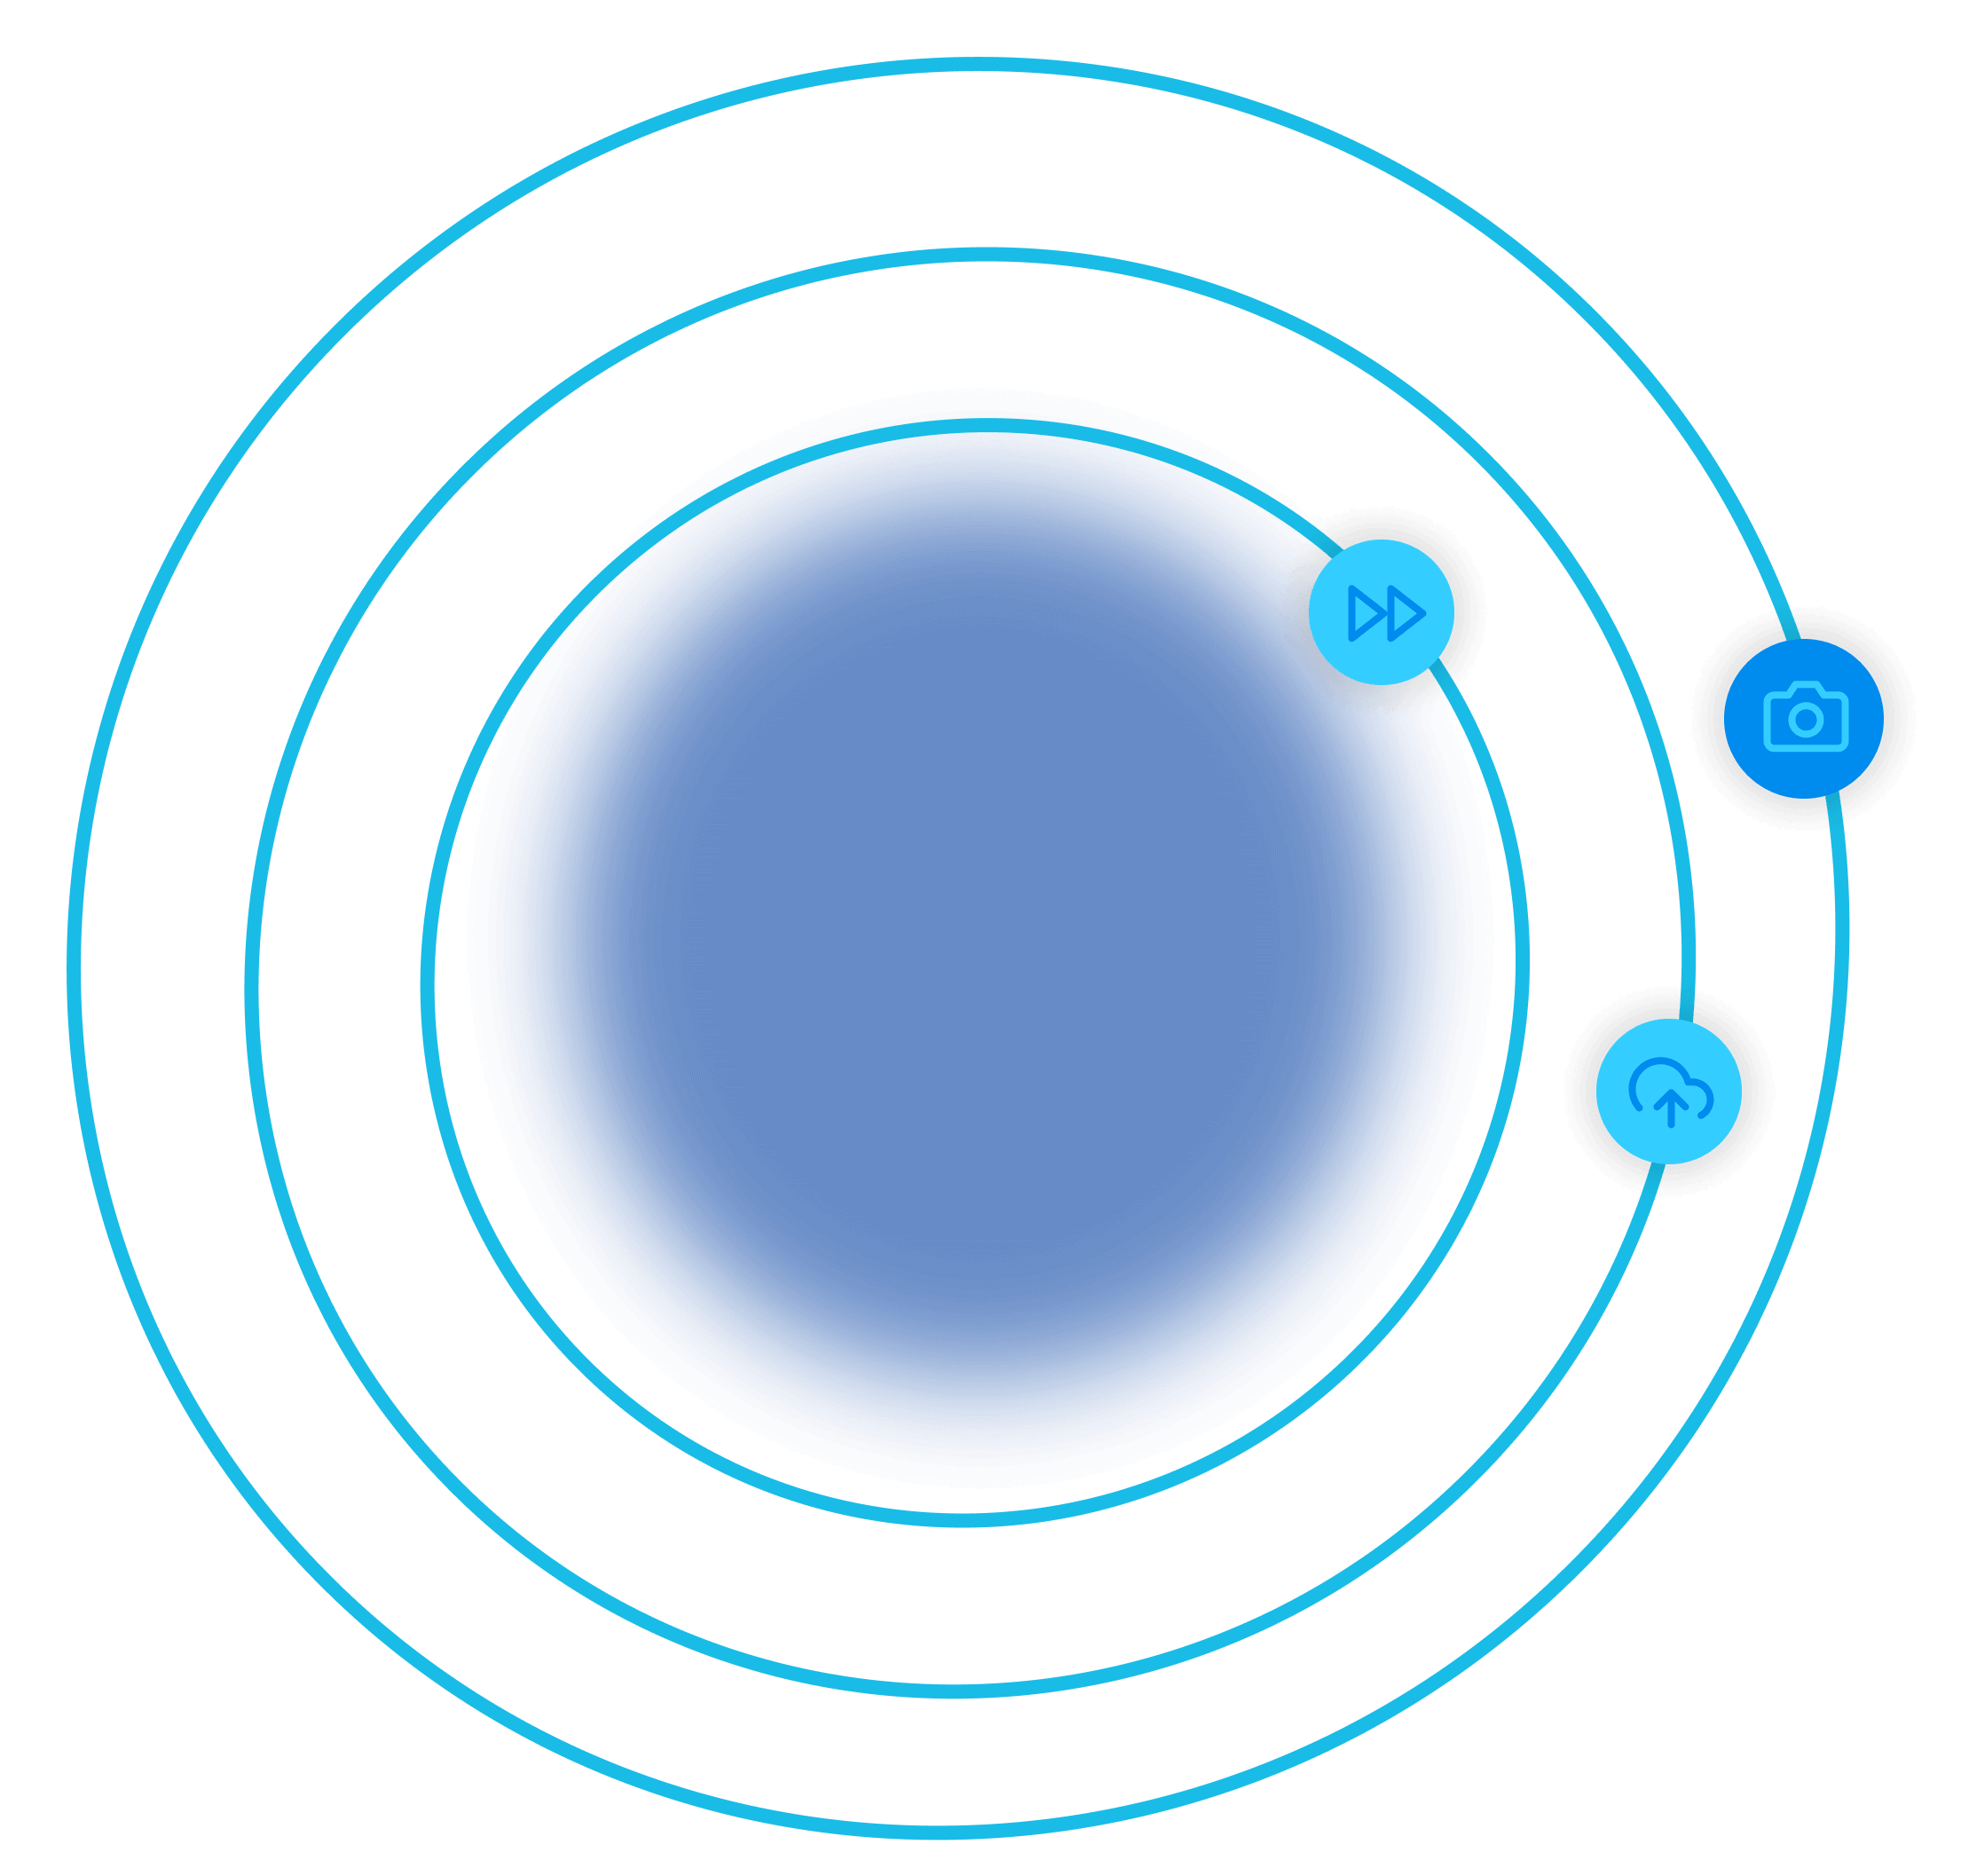 Blue circle with 'share' representing sharing information or content